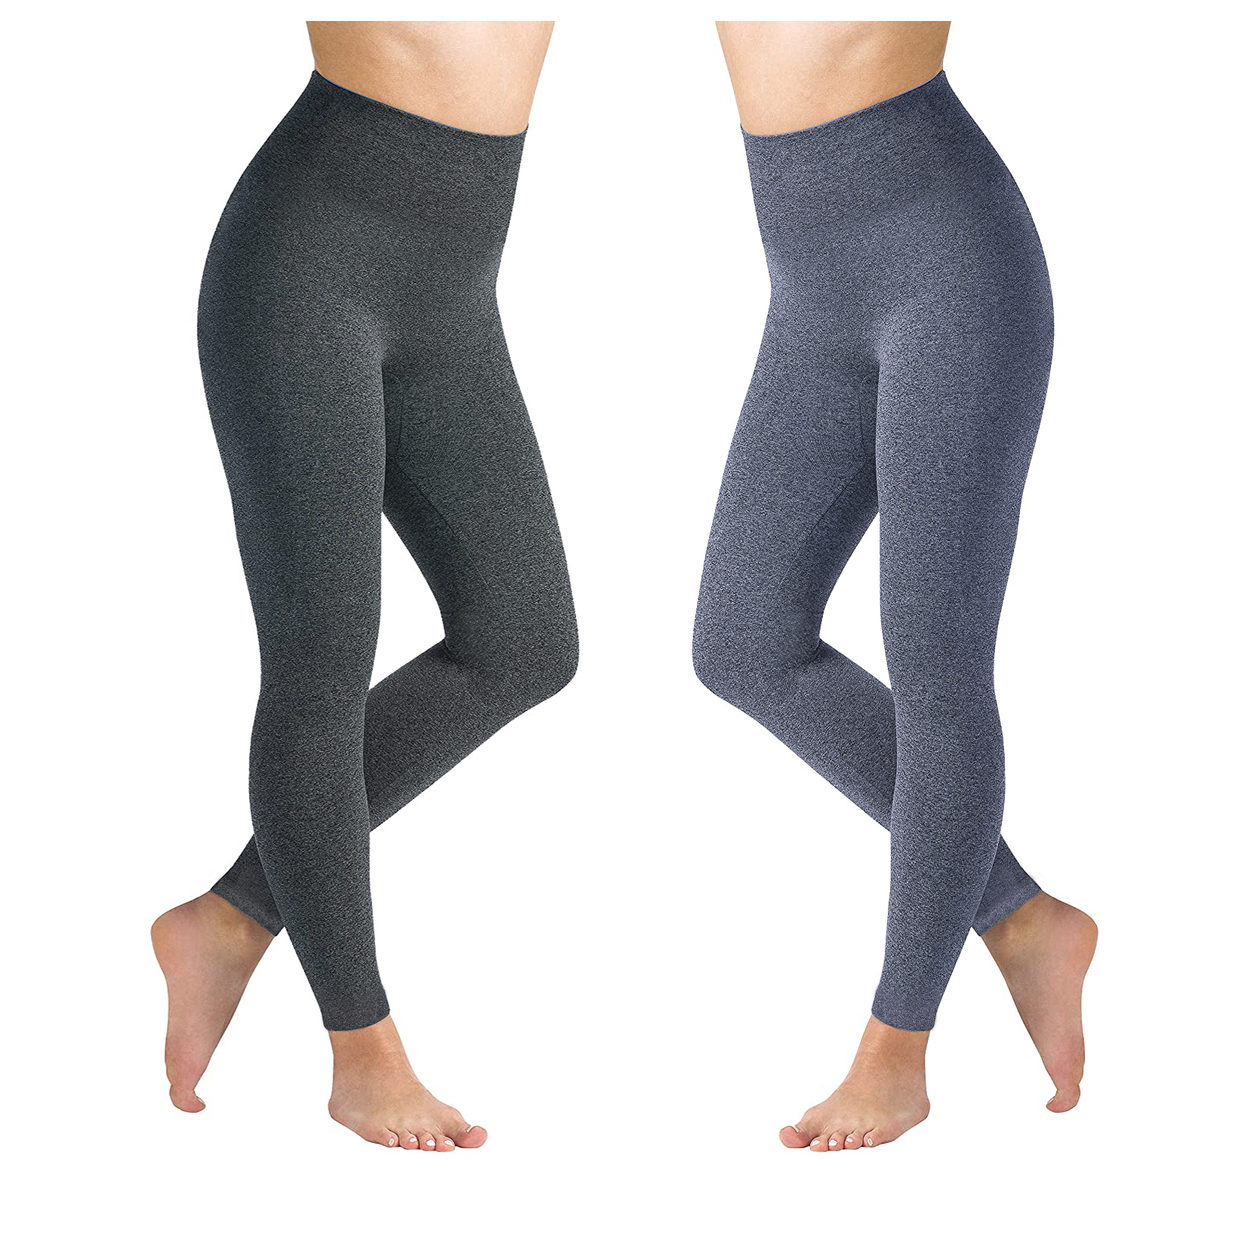 2-Pack: Women's High Waisted Ultra Soft Fleece Lined Warm Marled Leggings(Available In Plus Sizes) - Navy & Navy, 2x